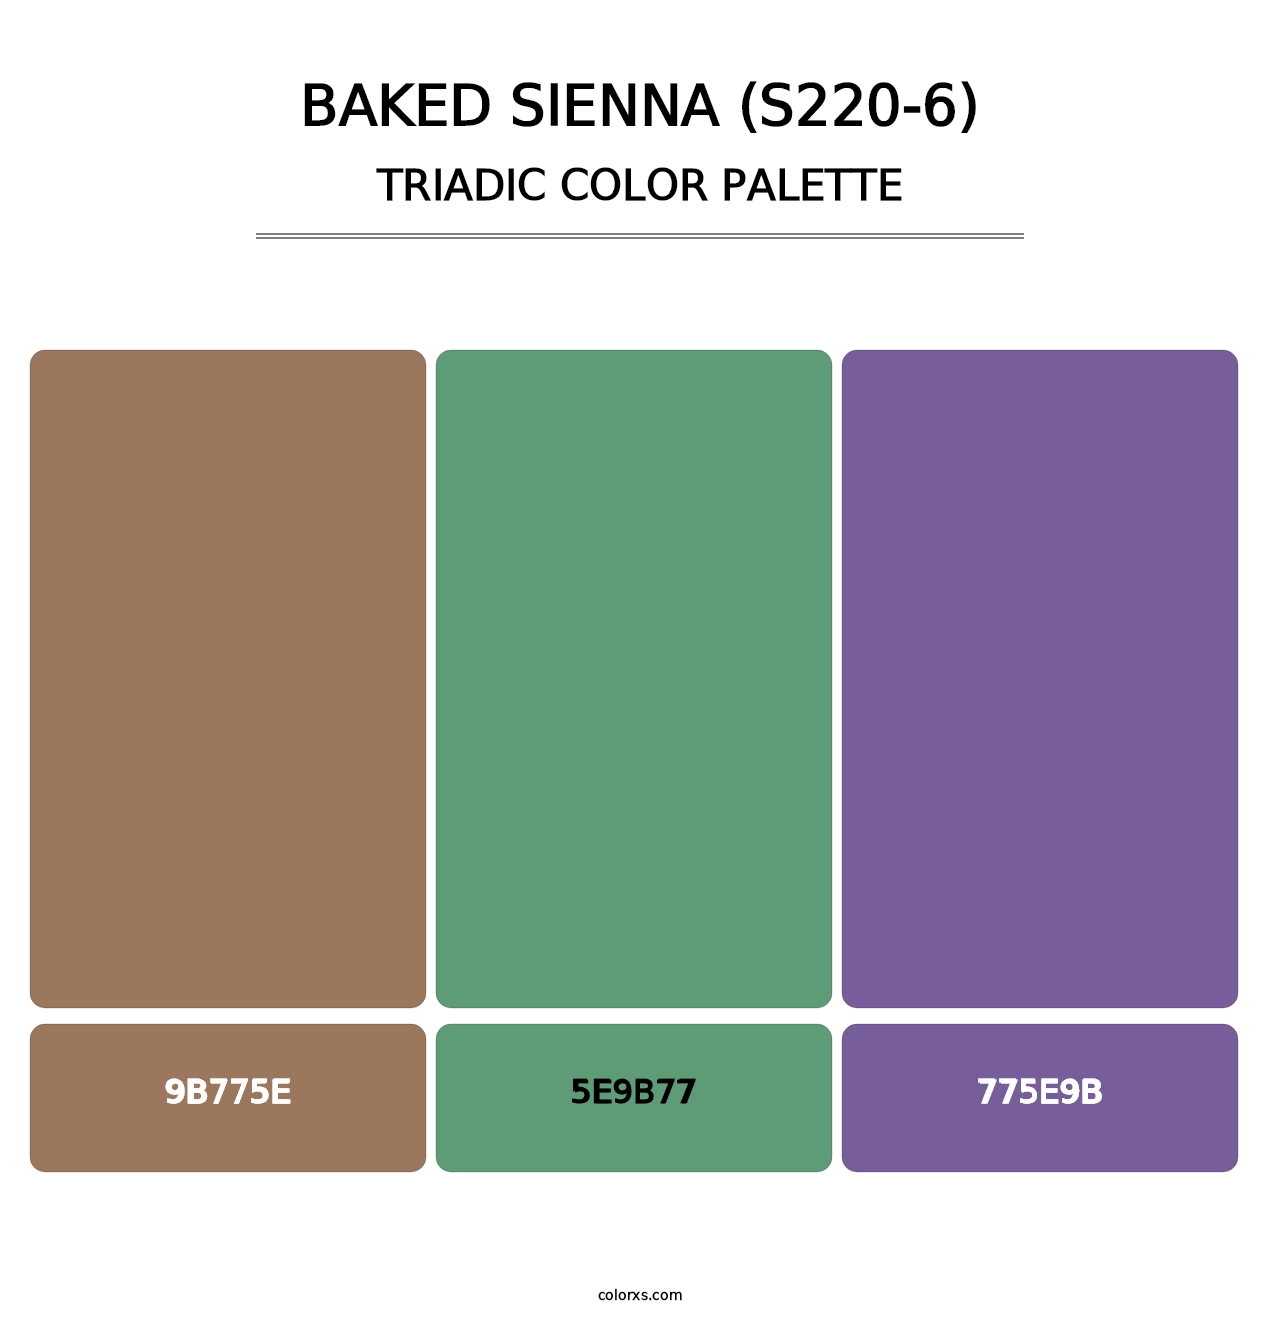 Baked Sienna (S220-6) - Triadic Color Palette